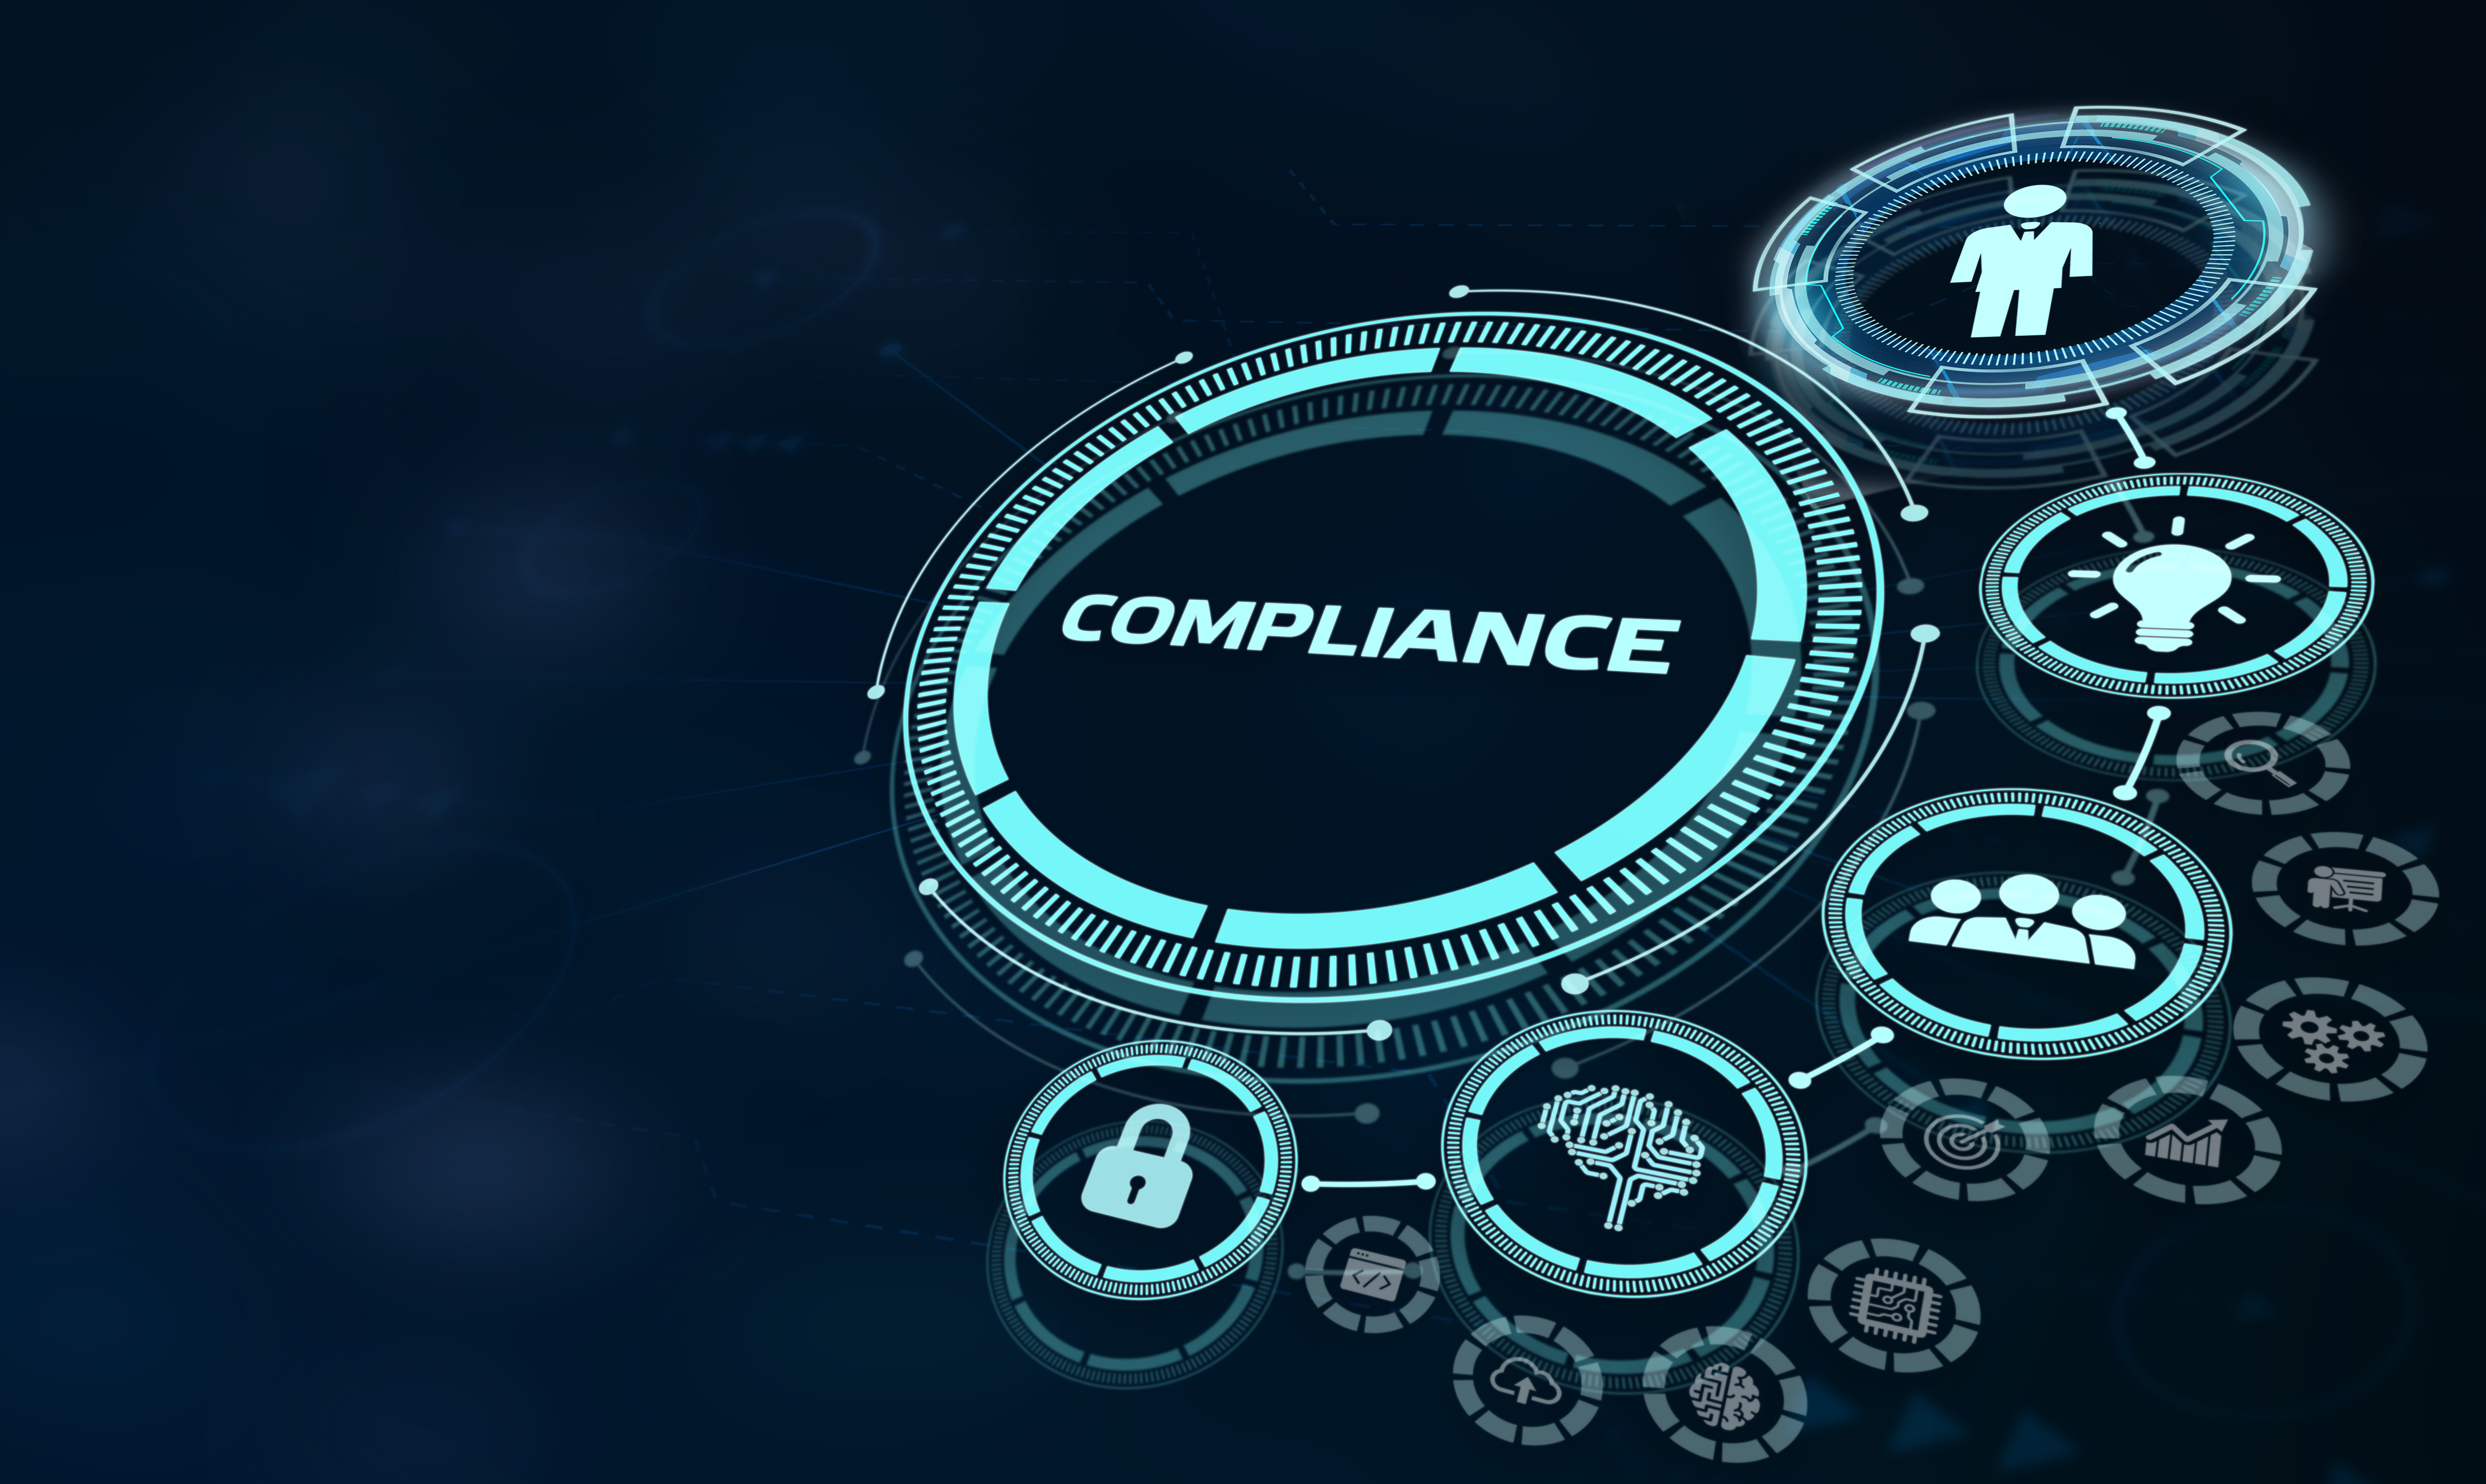 Featured image: Possible UK Government compliance metrics. - Read full post: UK Government Minimum Cyber Security Standard: Are You in Compliance?